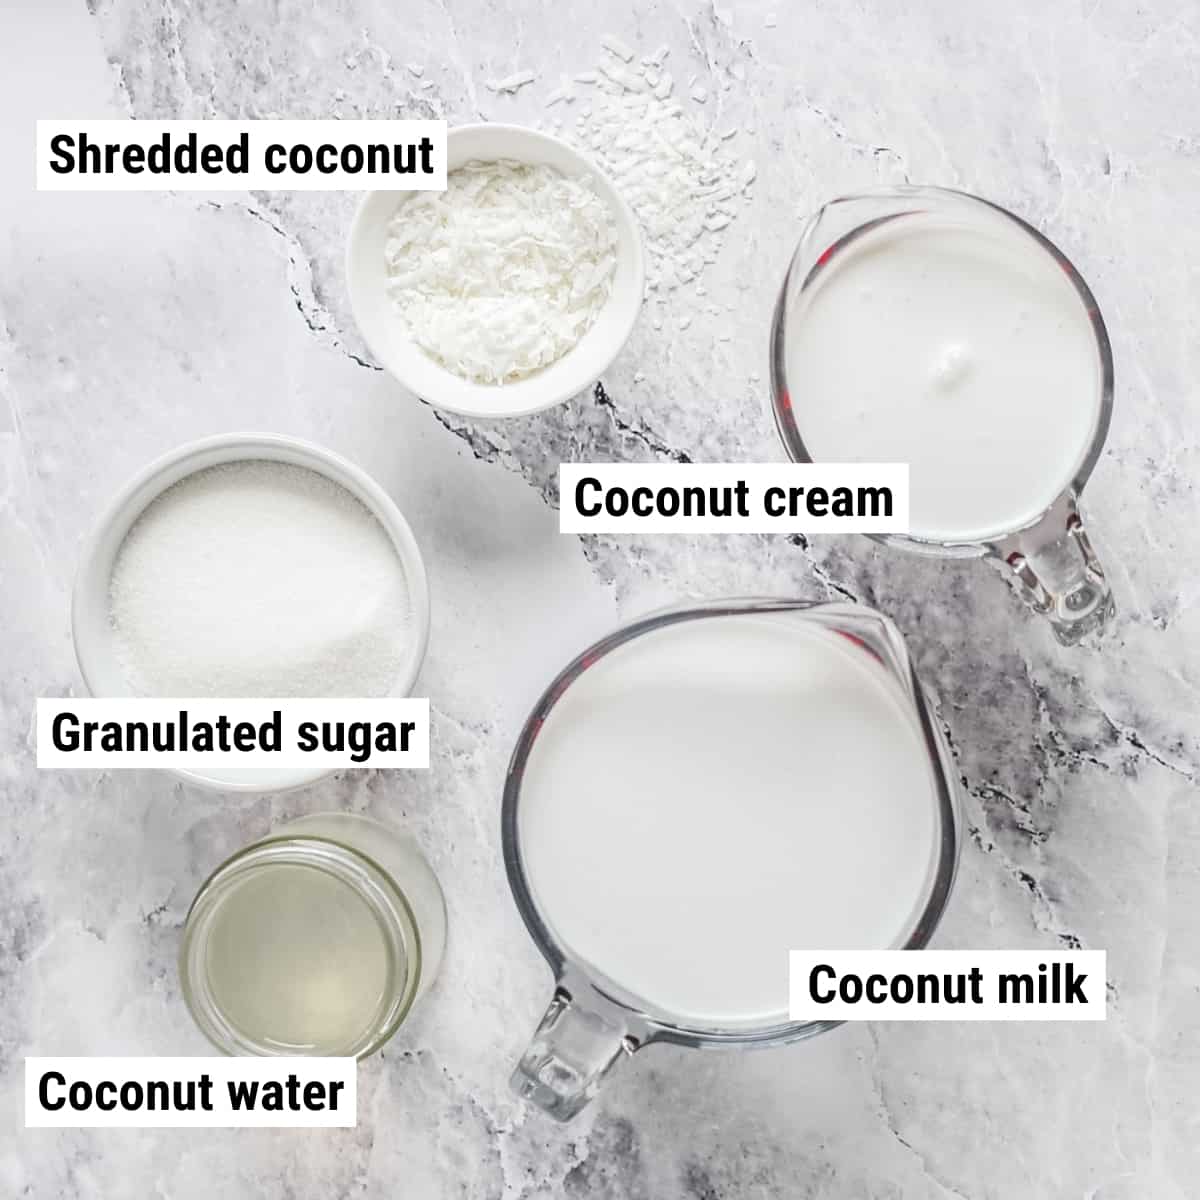 The ingredients for coconut sorbet spread out on a table.